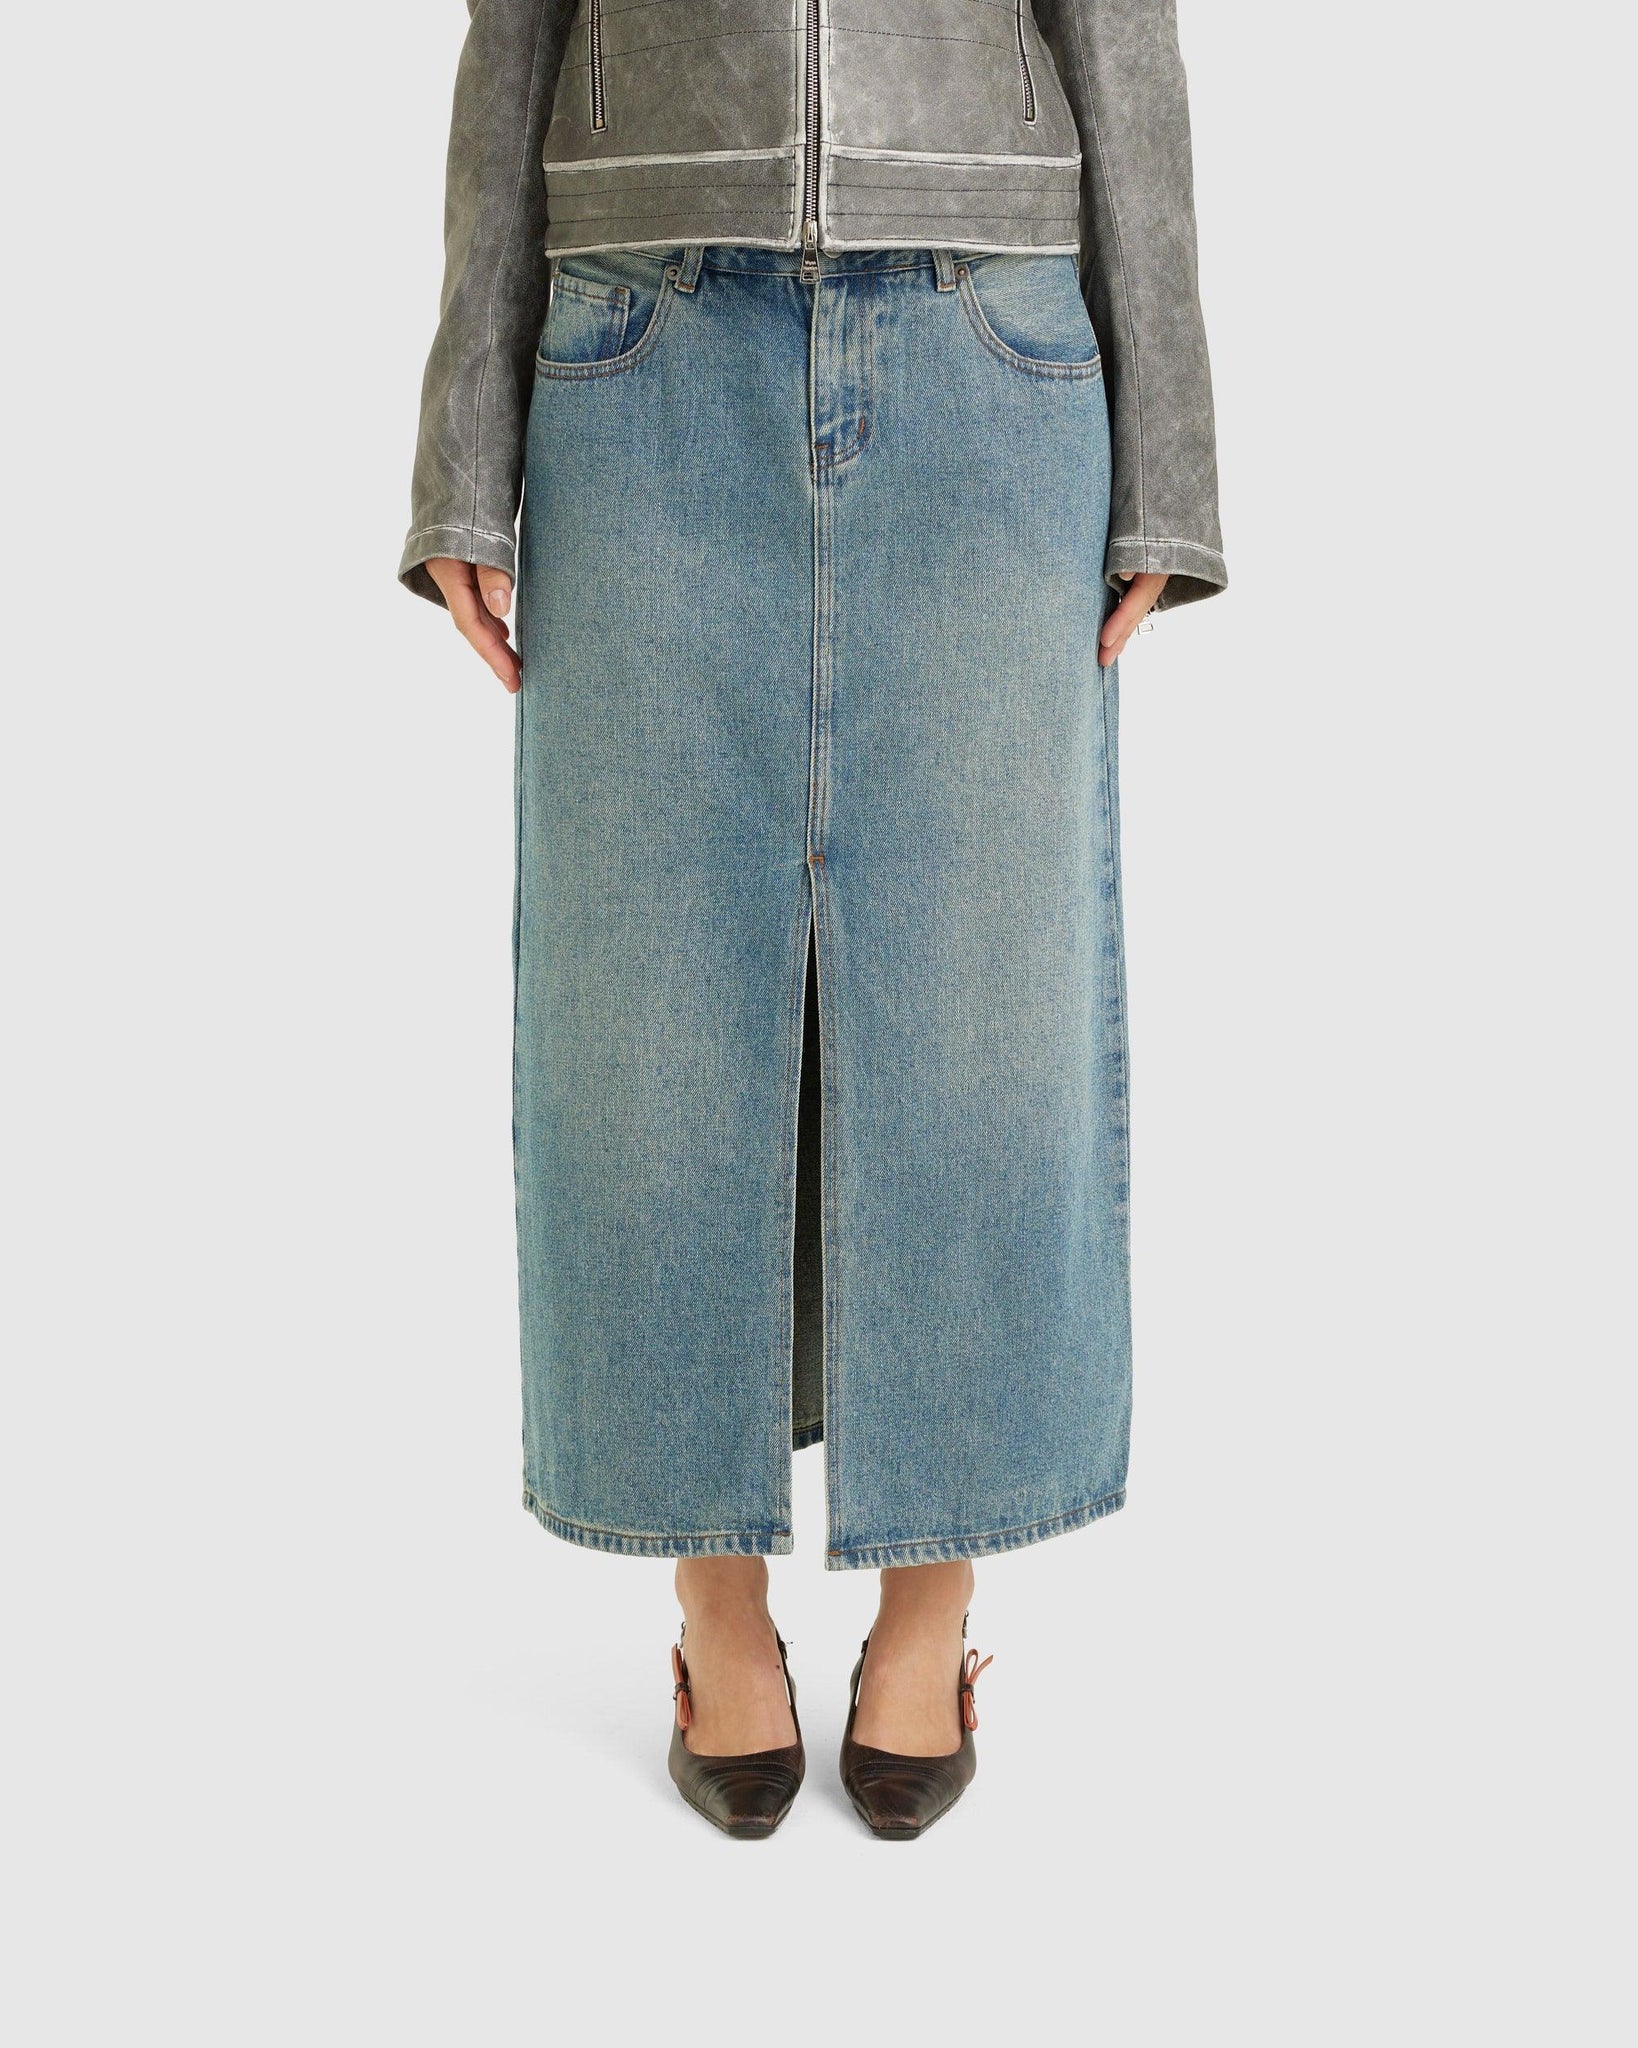 Denim Maxi Skirt - {{ collection.title }} - Chinatown Country Club 